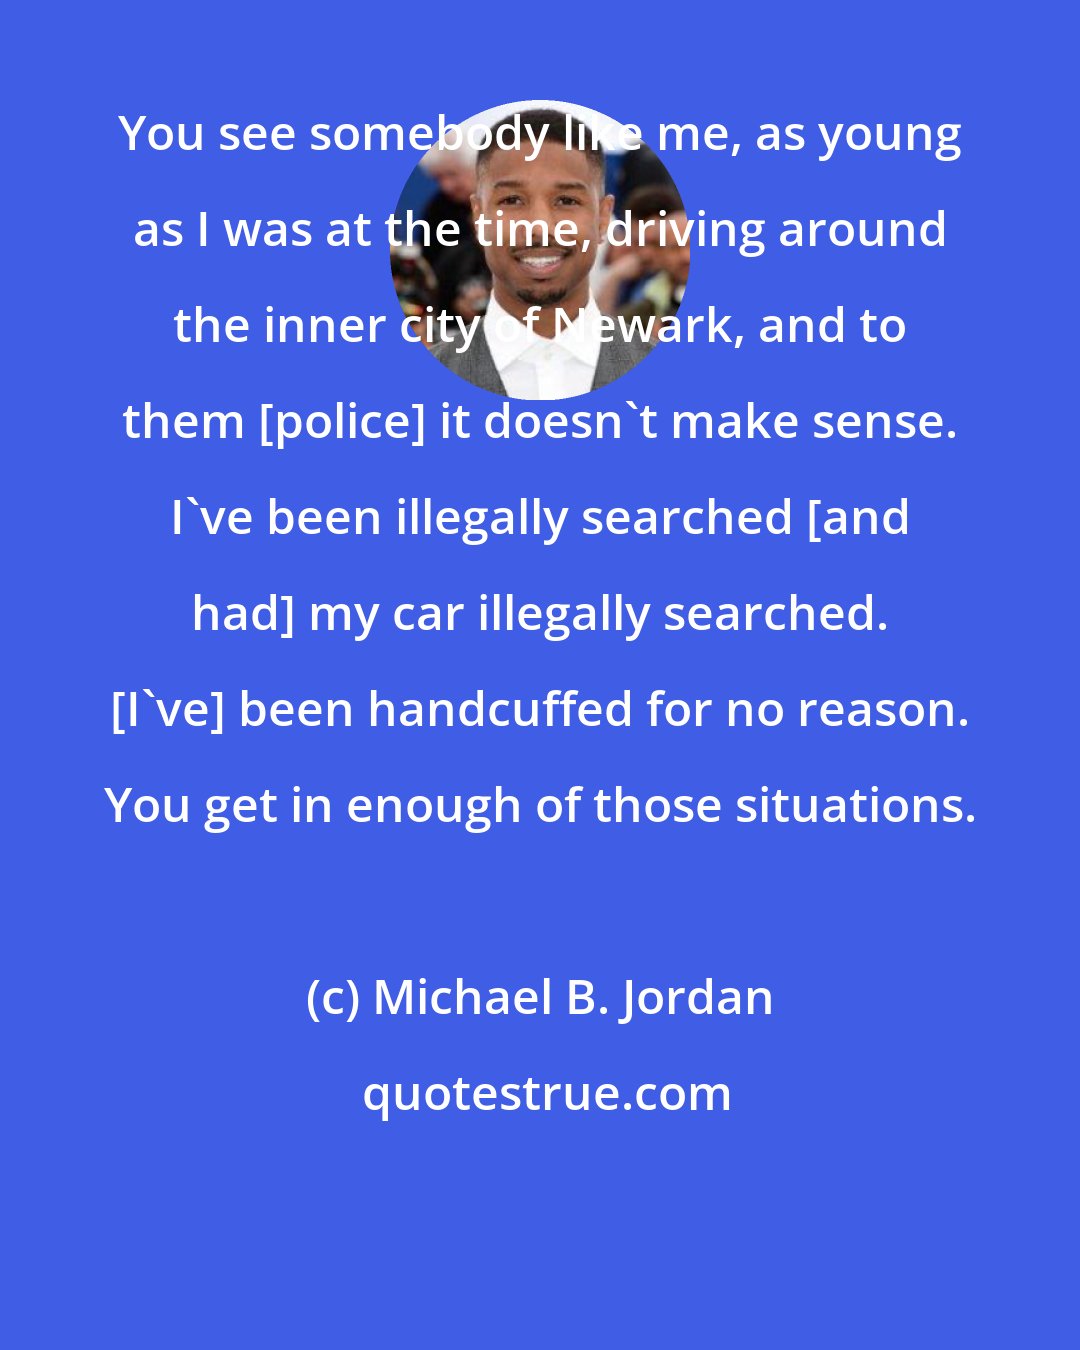 Michael B. Jordan: You see somebody like me, as young as I was at the time, driving around the inner city of Newark, and to them [police] it doesn't make sense. I've been illegally searched [and had] my car illegally searched. [I've] been handcuffed for no reason. You get in enough of those situations.